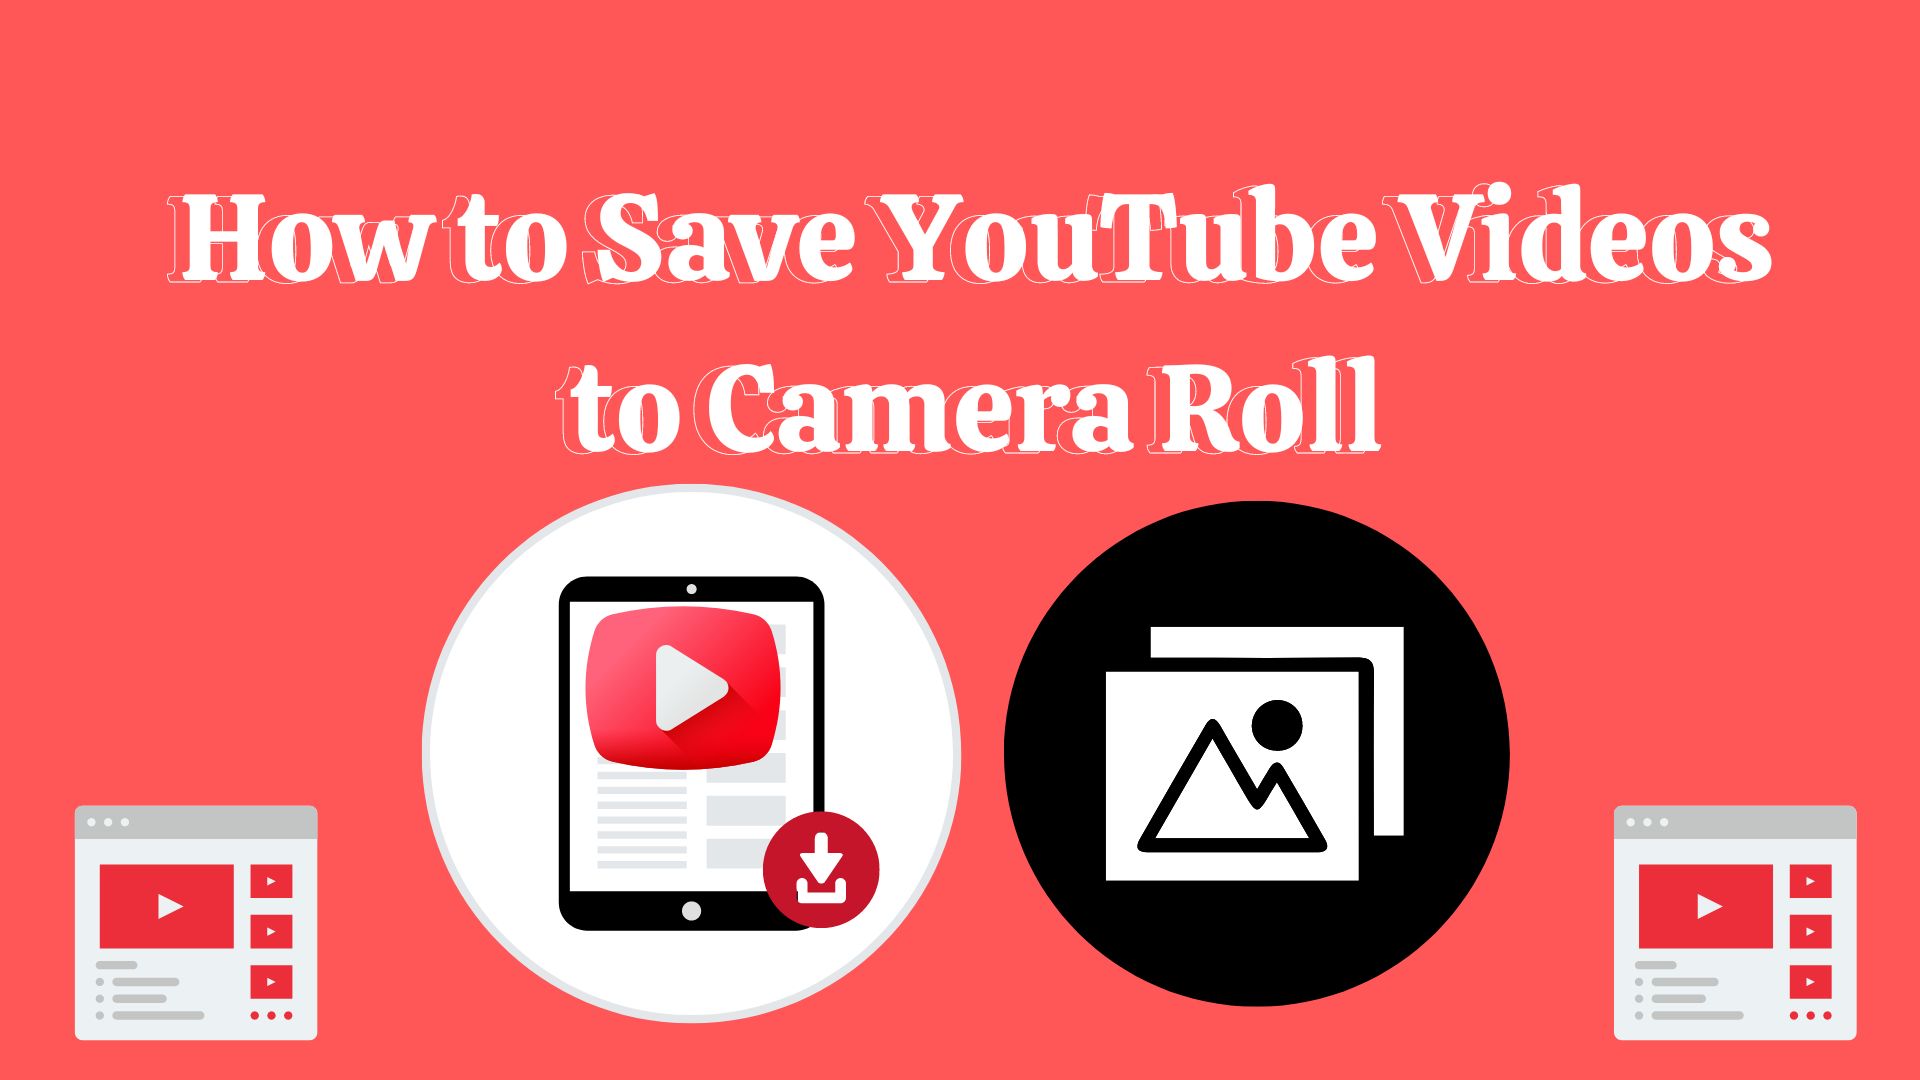 How to Save YouTube Videos to Camera Roll [Full Guide]